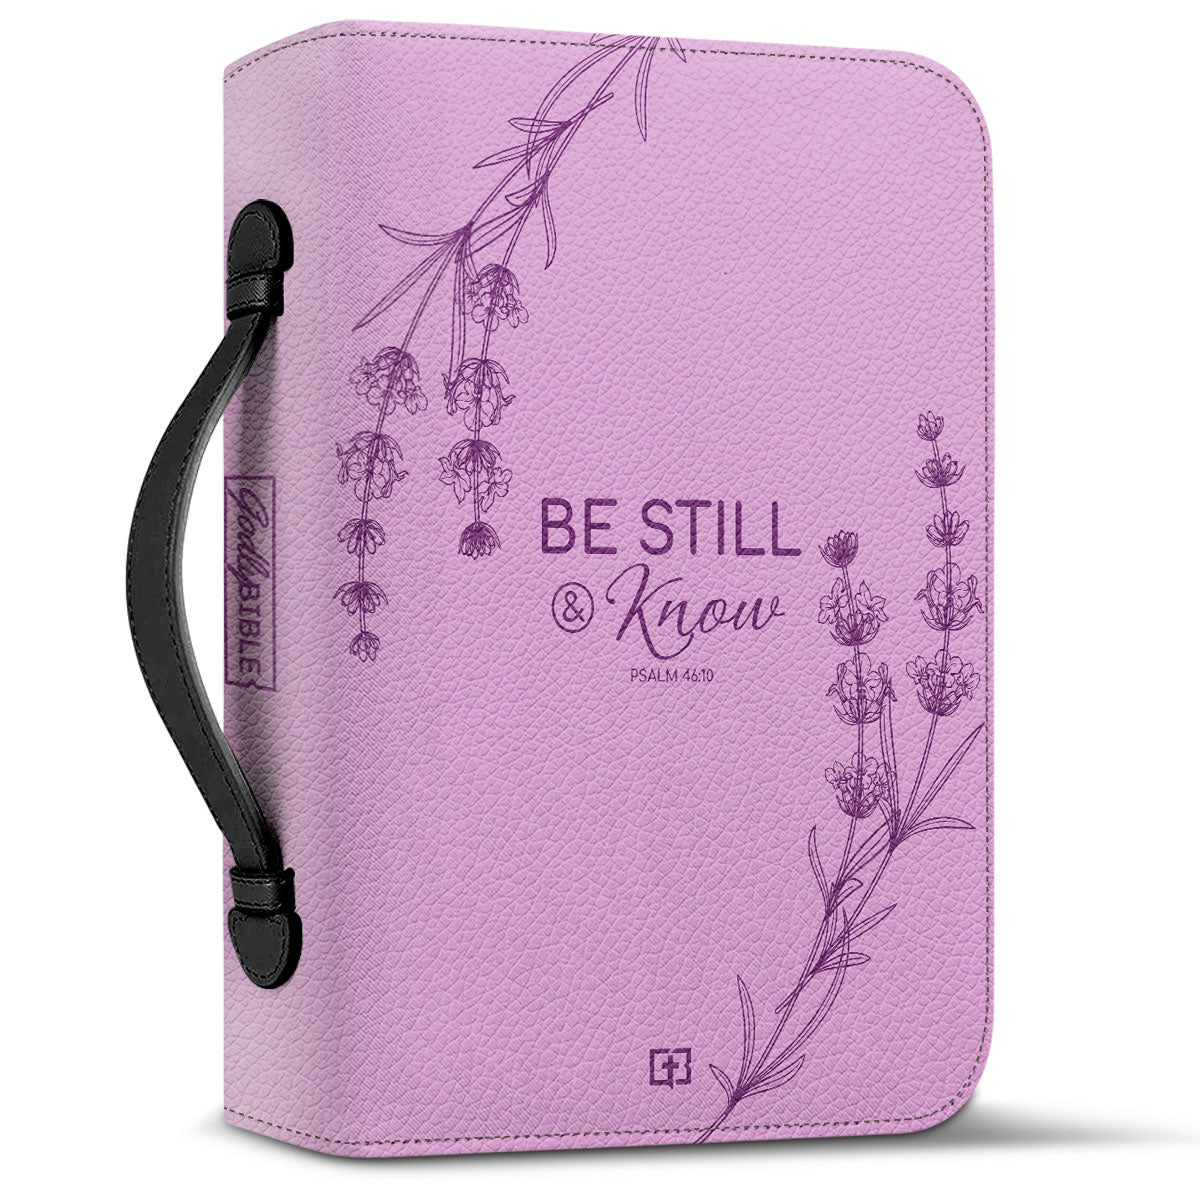 Be Still And Know Psalm 46 10 Lavender Personalized Bible Cover - Gift Bible Cover for Christians